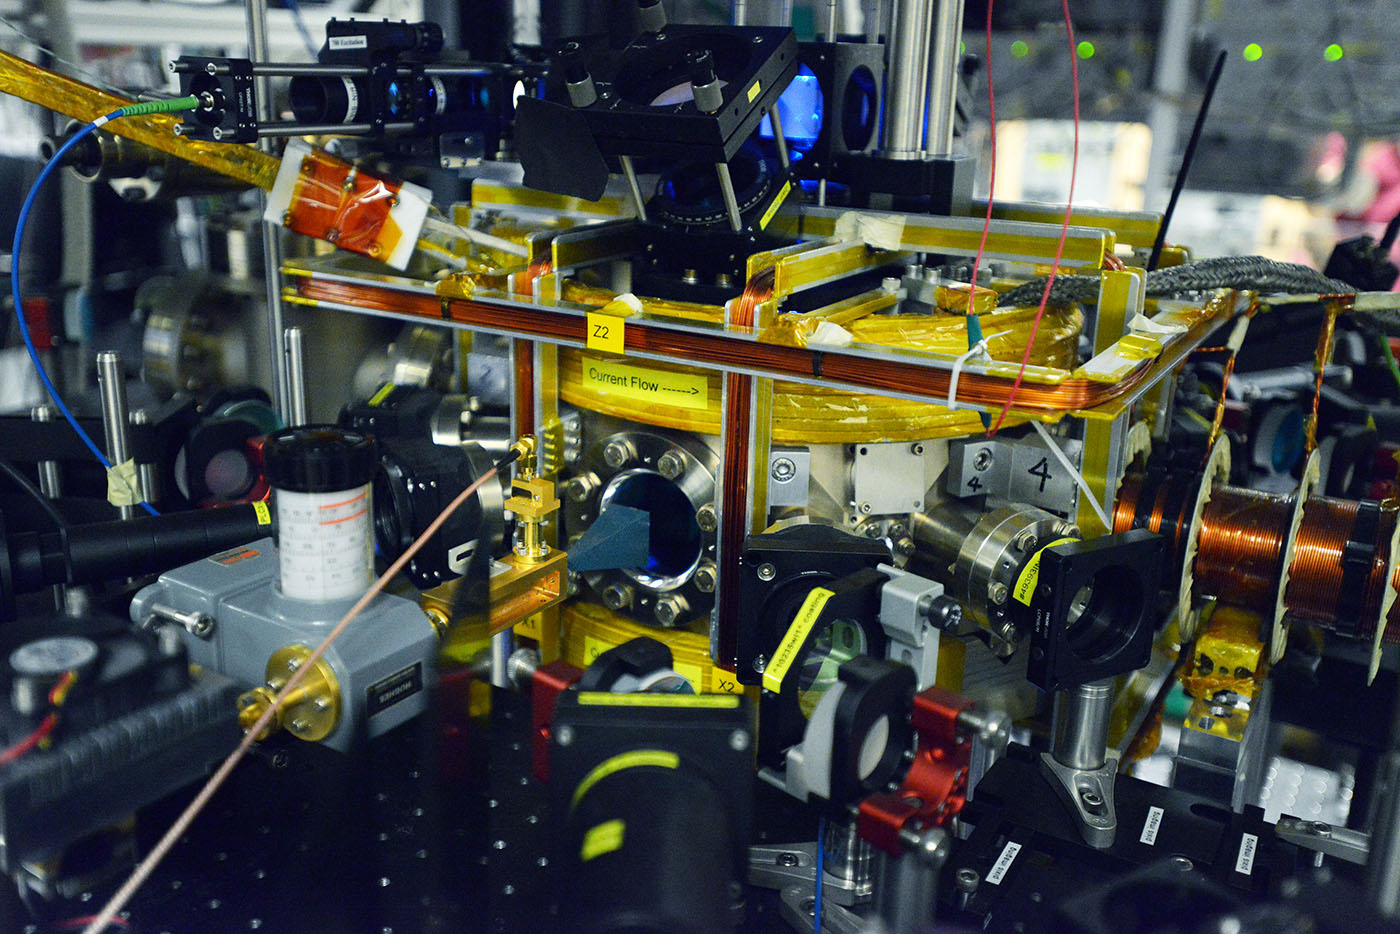 Rydberg atom experiment, showing the central metal chamber